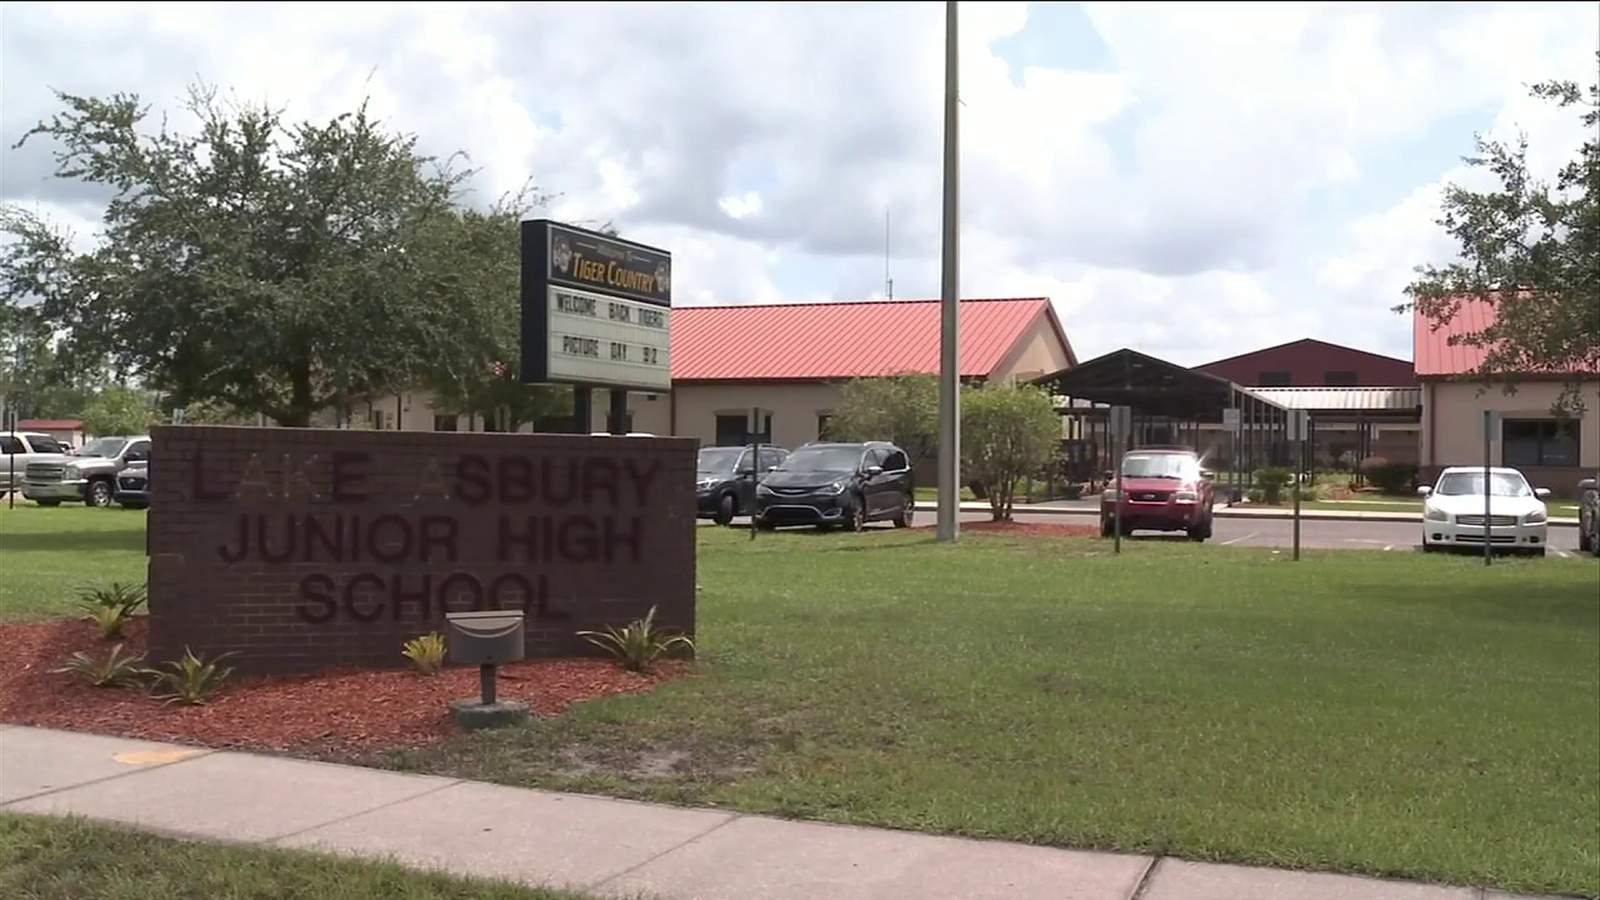 Sheriff: 13-year-old arrested after threatening shooting at Clay County school